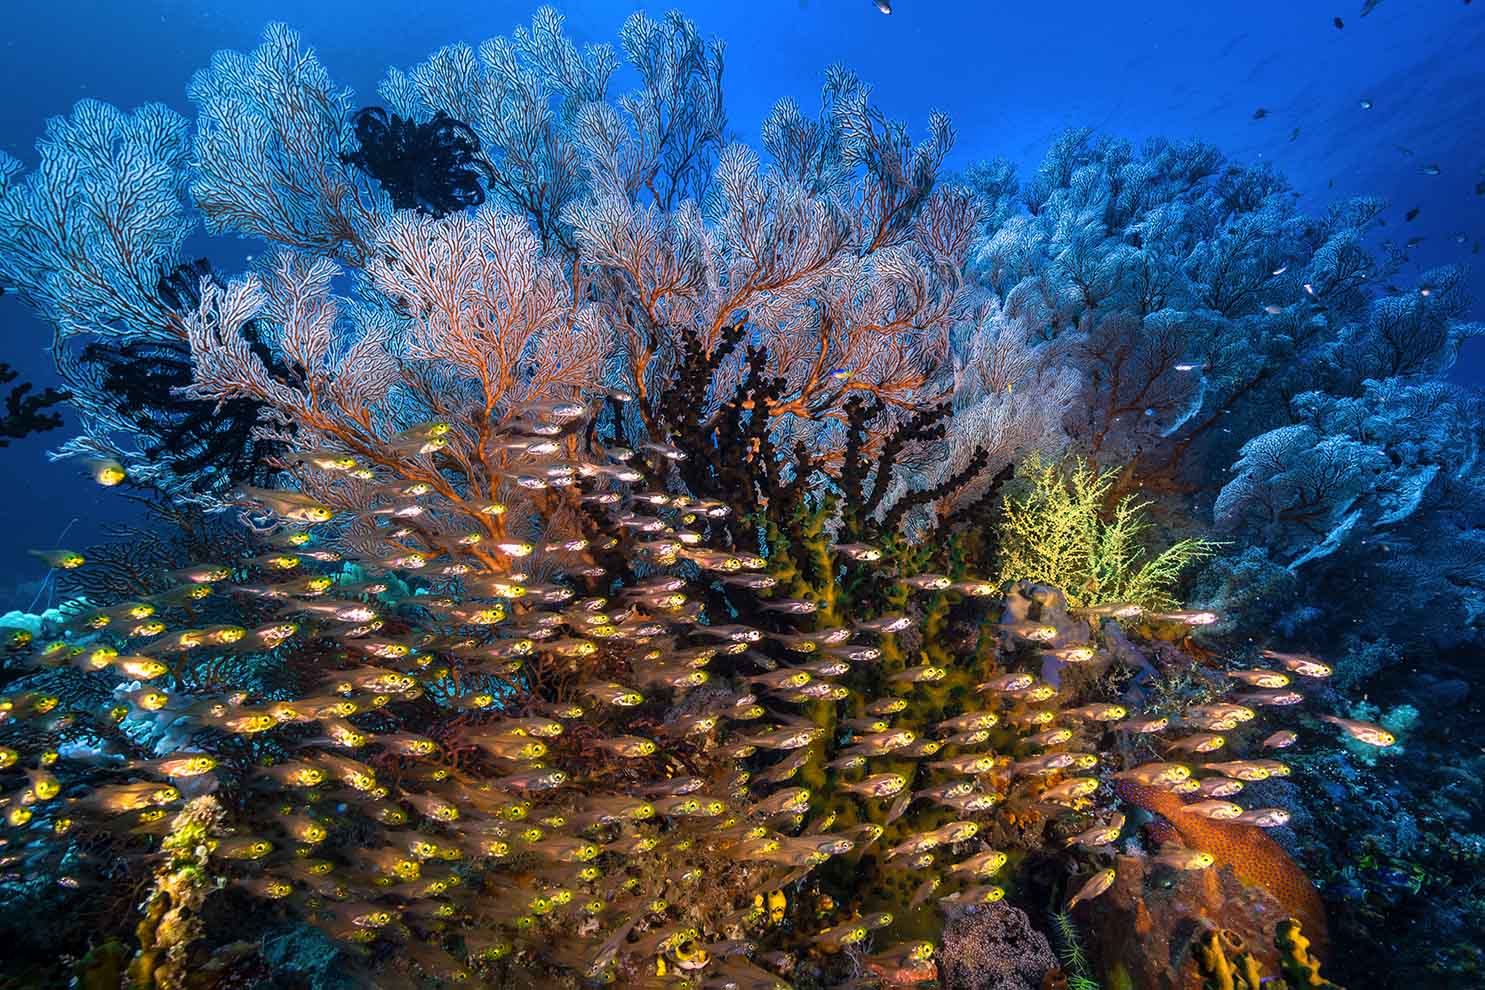 A dense school of glassfish crowds below a coral to shelter from the current. The extremely strong currents here serve as an important heat exchange mechanism that never allows water to stagnate, effectively buffering the area from the impacts of climate change. But this is no ordinary current. This is one of the strongest currents on the planet (Source: David Doubilet)